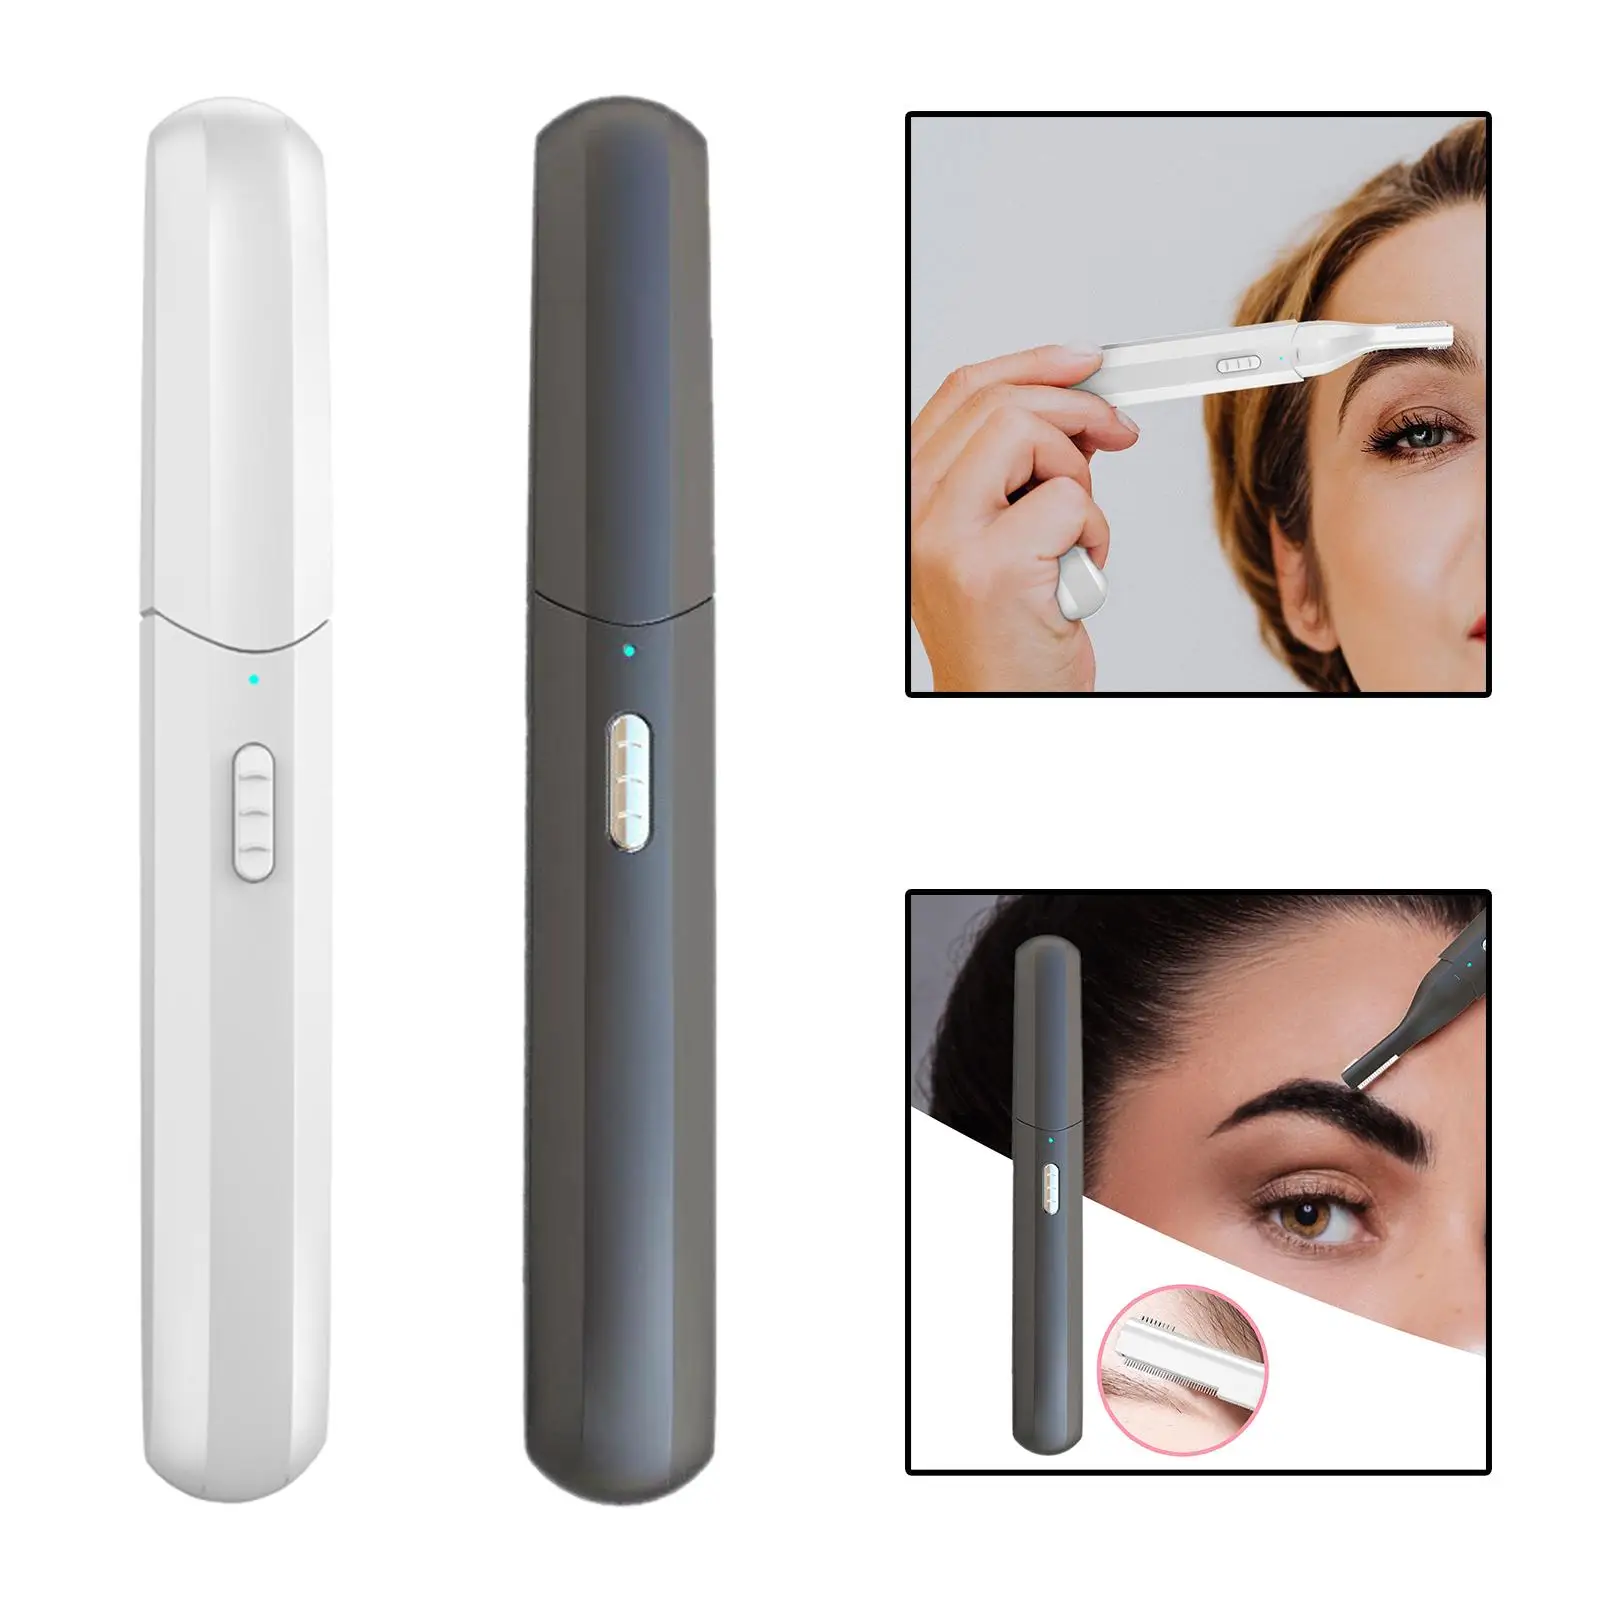 Electric Eyebrow trimming Facial Shaving Tool with Dual Cutter Head No Pulling Hair Removal Tool for Lips Arms Armpit